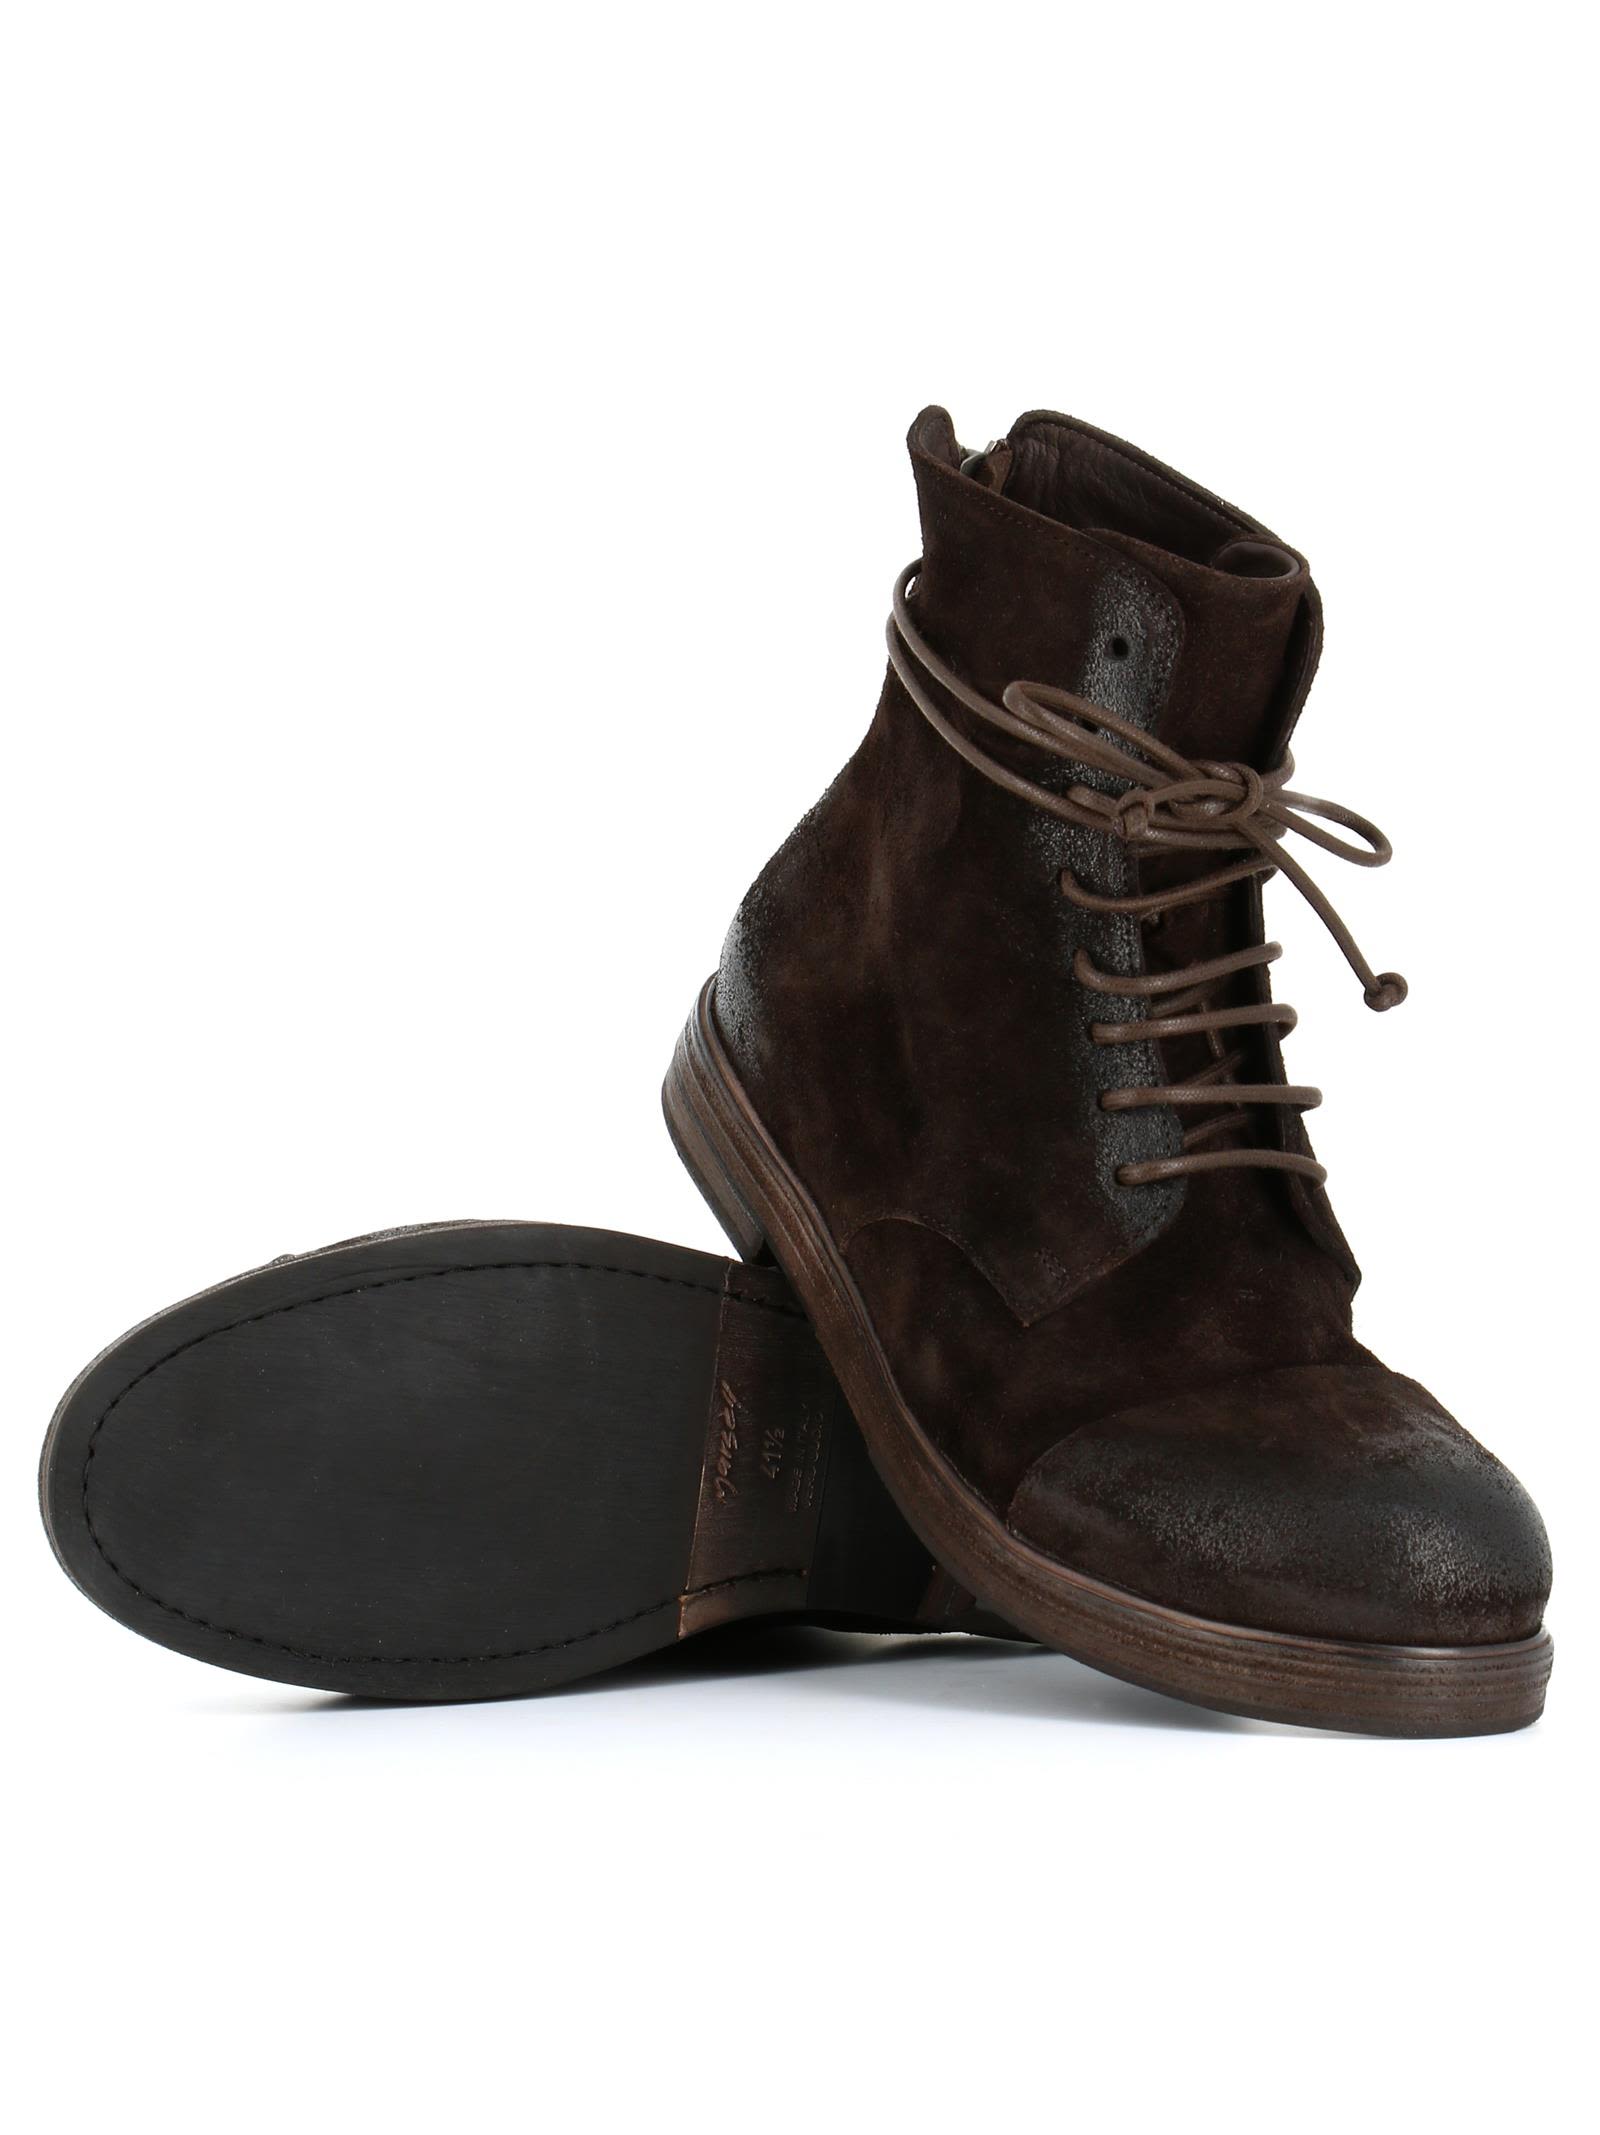 Marsell Marsell Lace-up Boots "mm1331" - Brown - 10631483 | italist